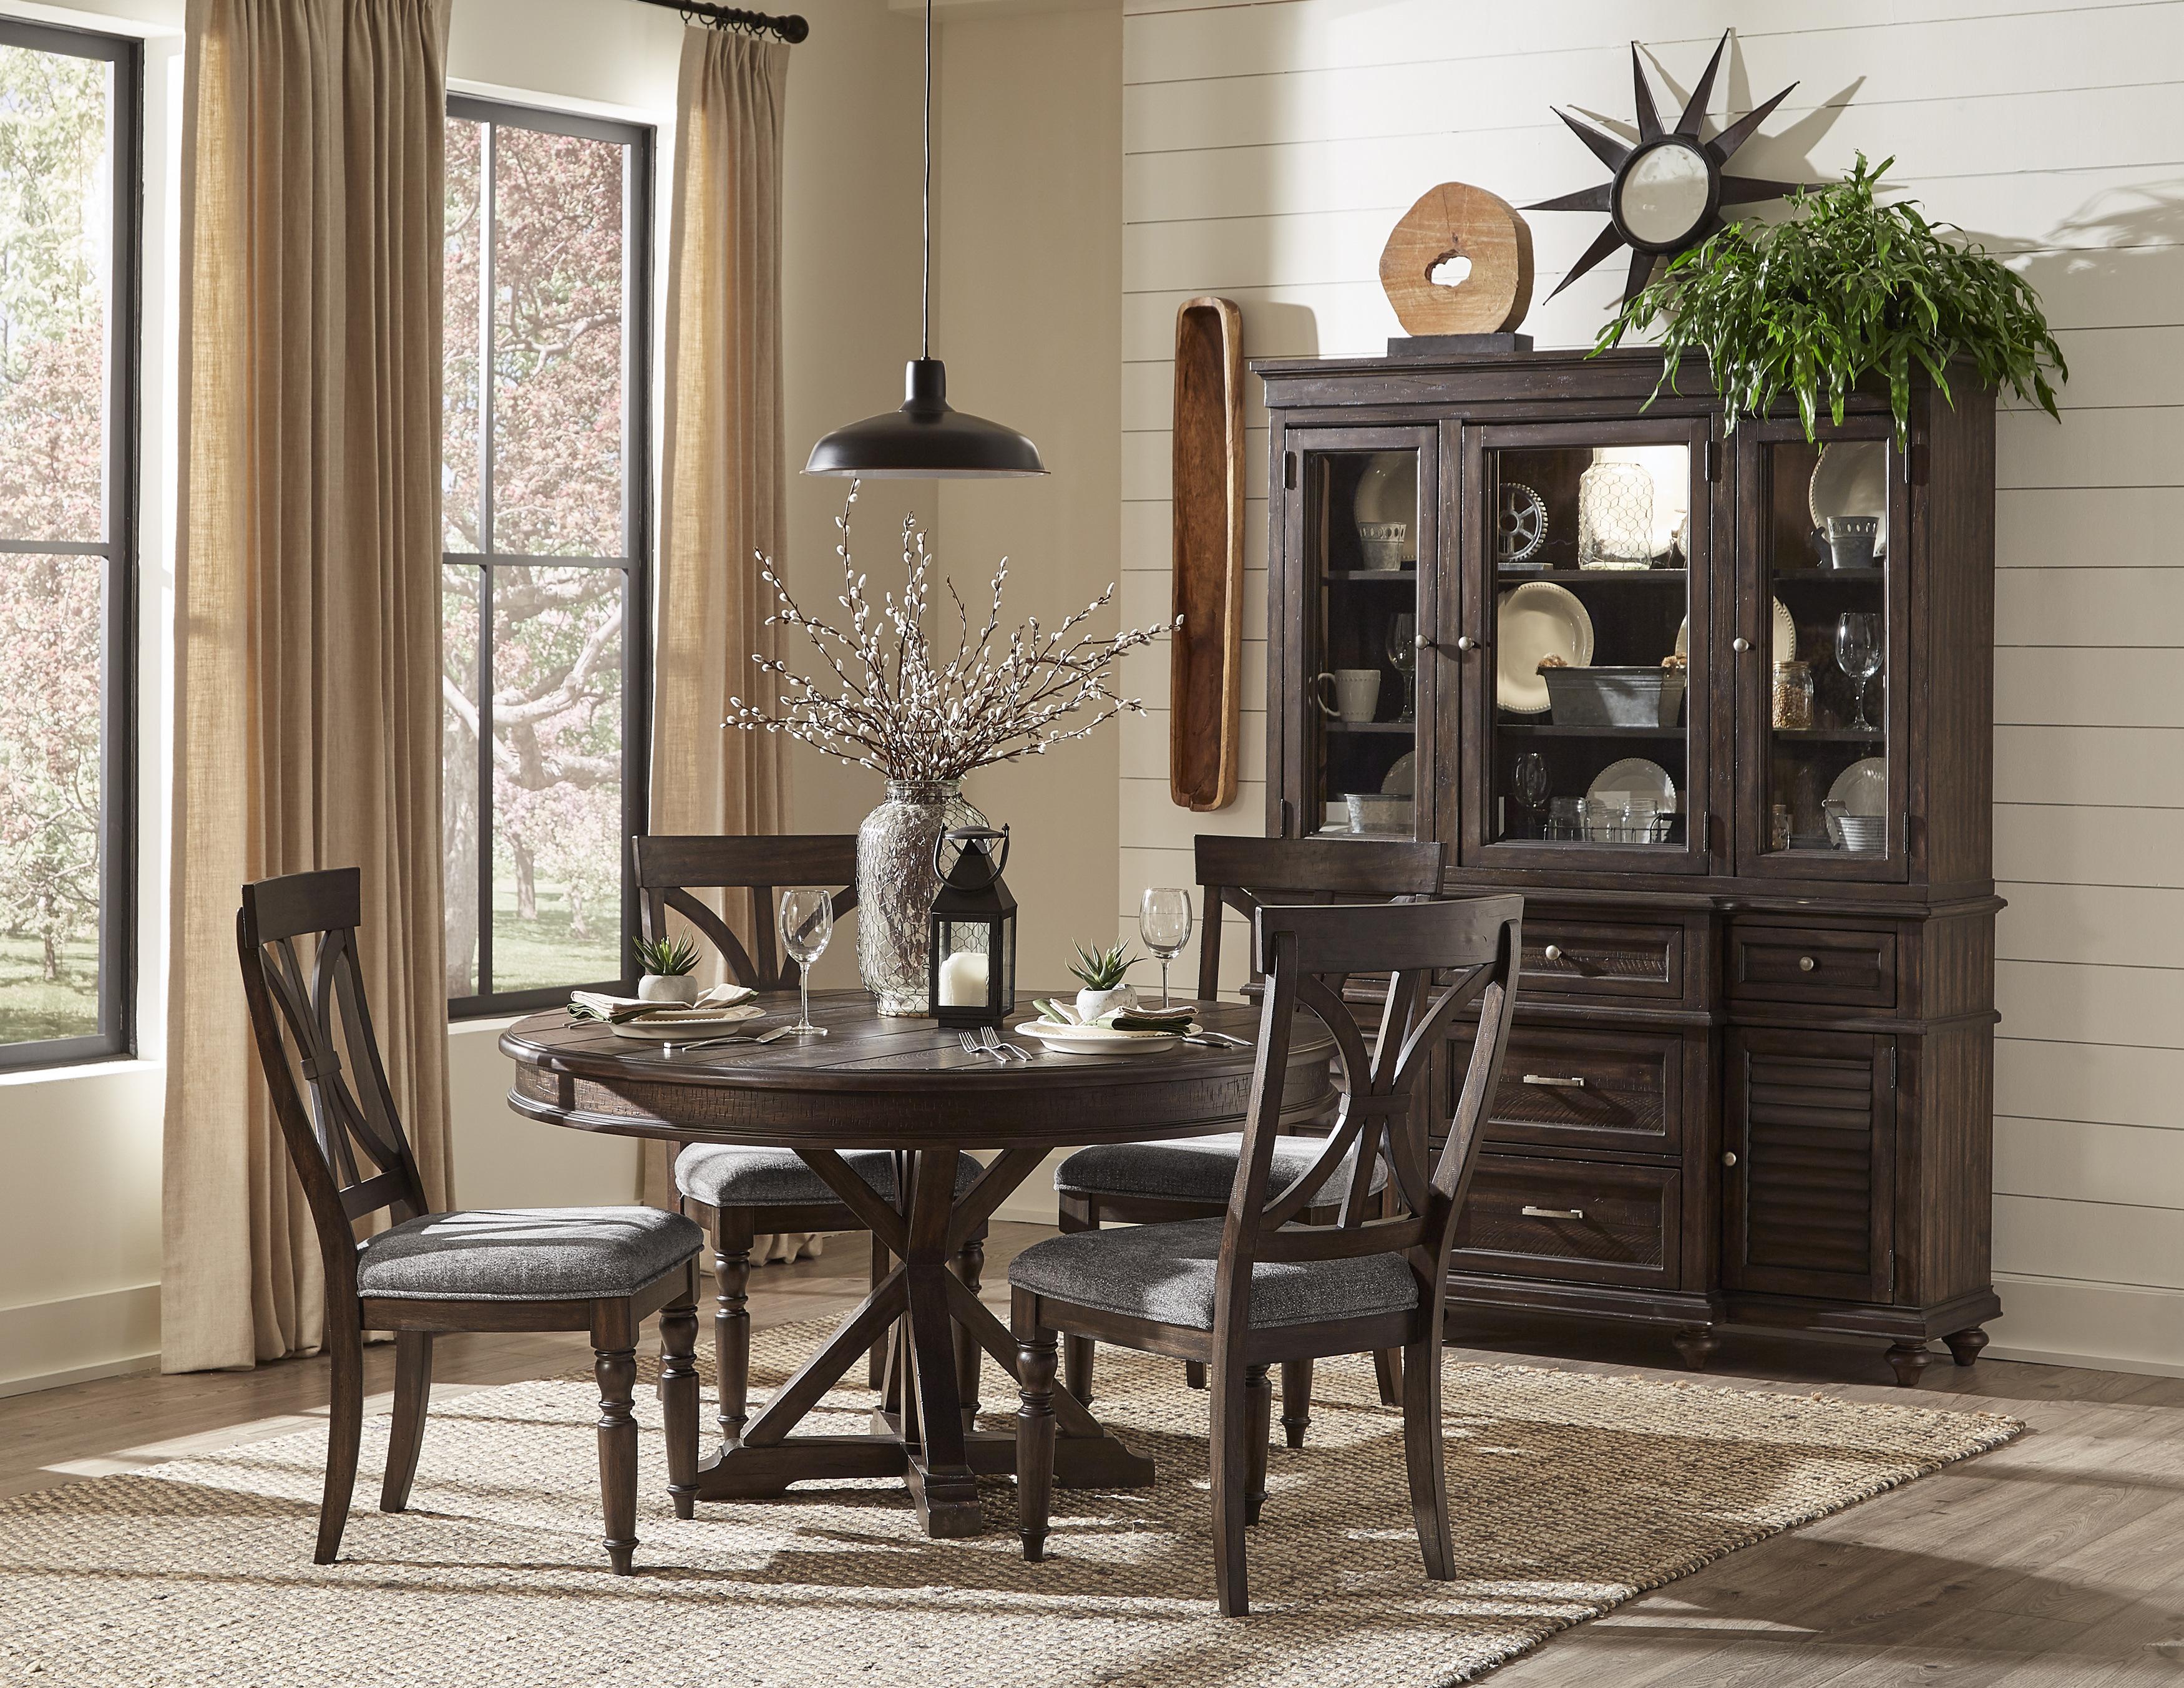 Transitional Dining Room Set 1689-54*6PC Cardano 1689-54*6PC in Charcoal Polyester